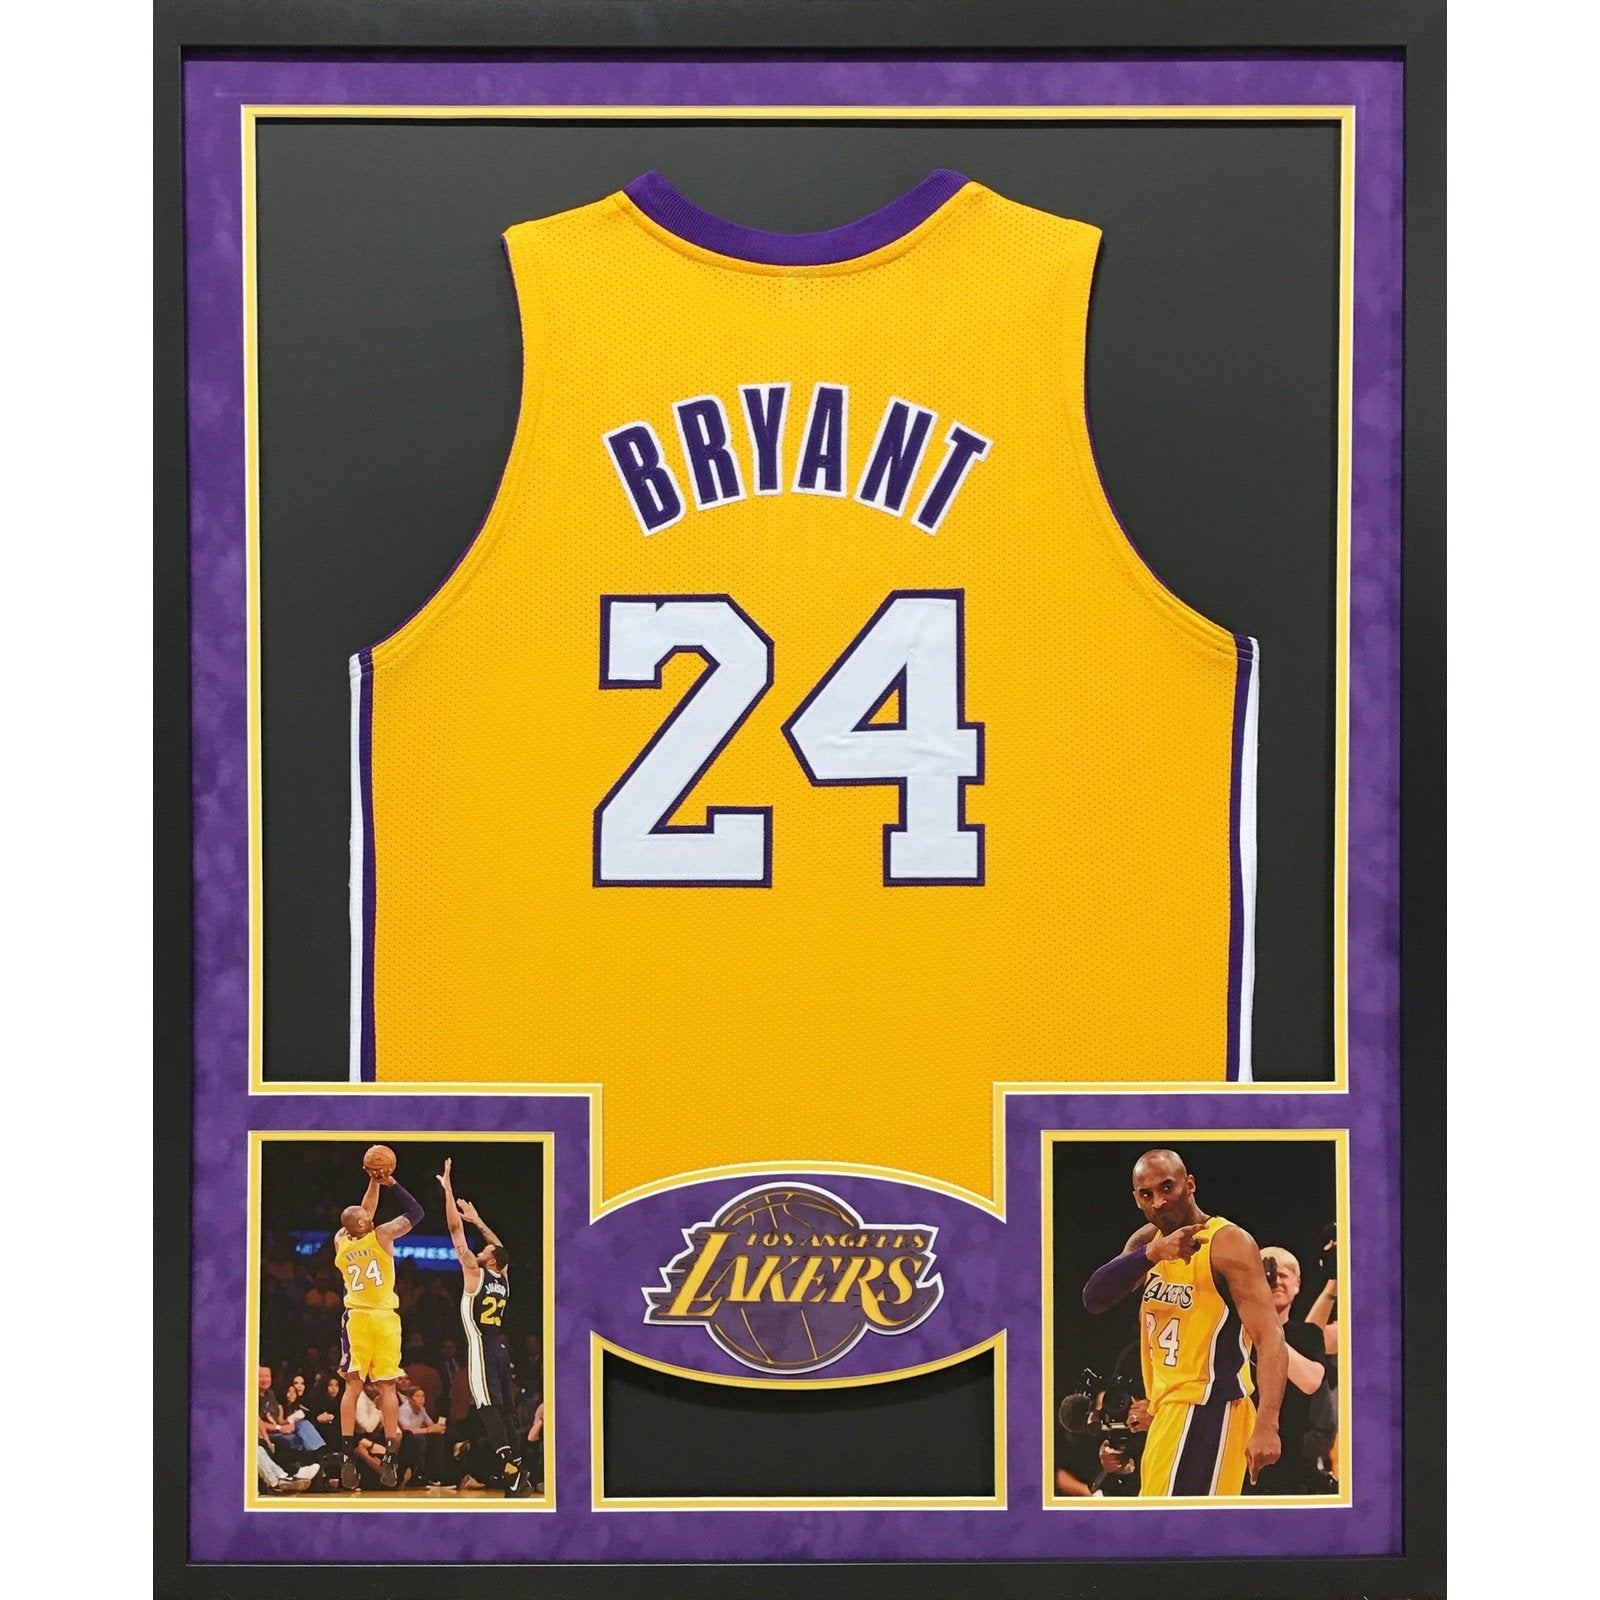 Where To Buy Kobe Bryant's Official Lakers Jersey?